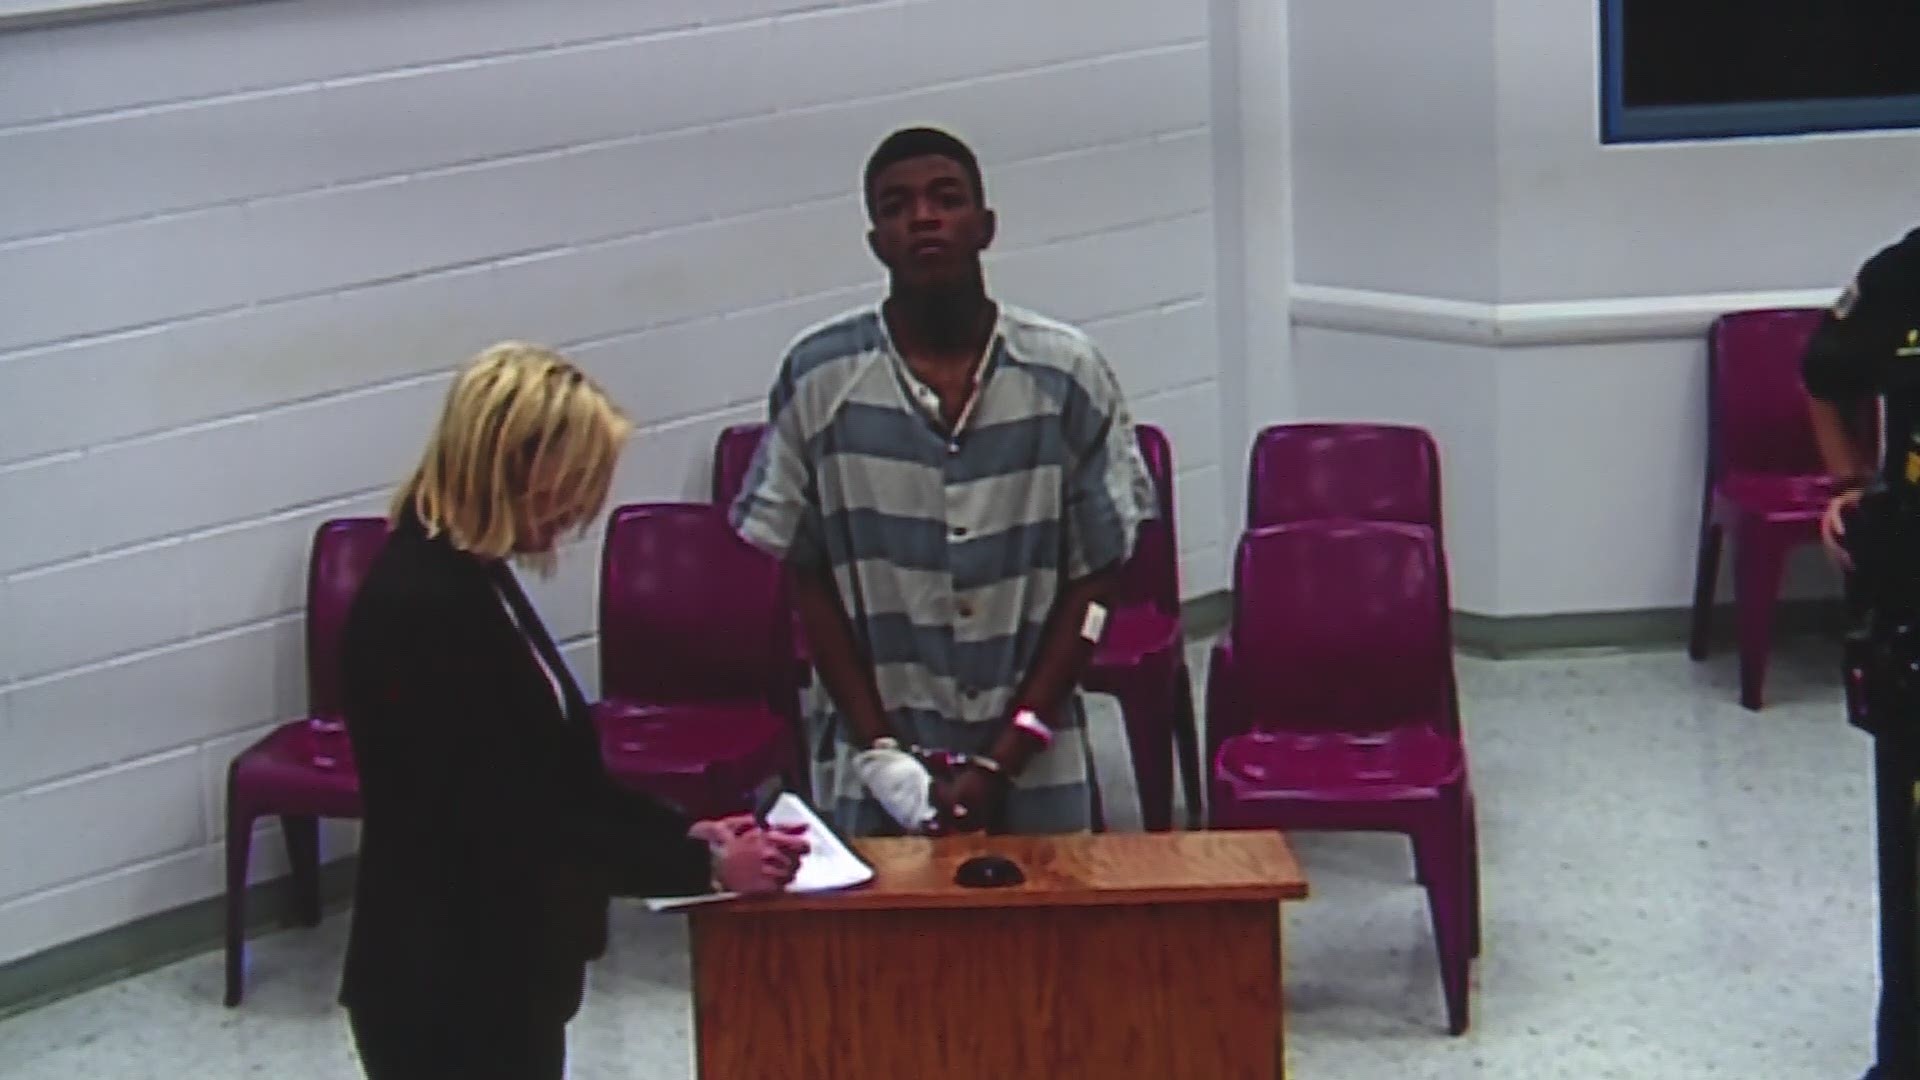 Youngeen Act, Kayanta Bullard, was in court on Tuesday.